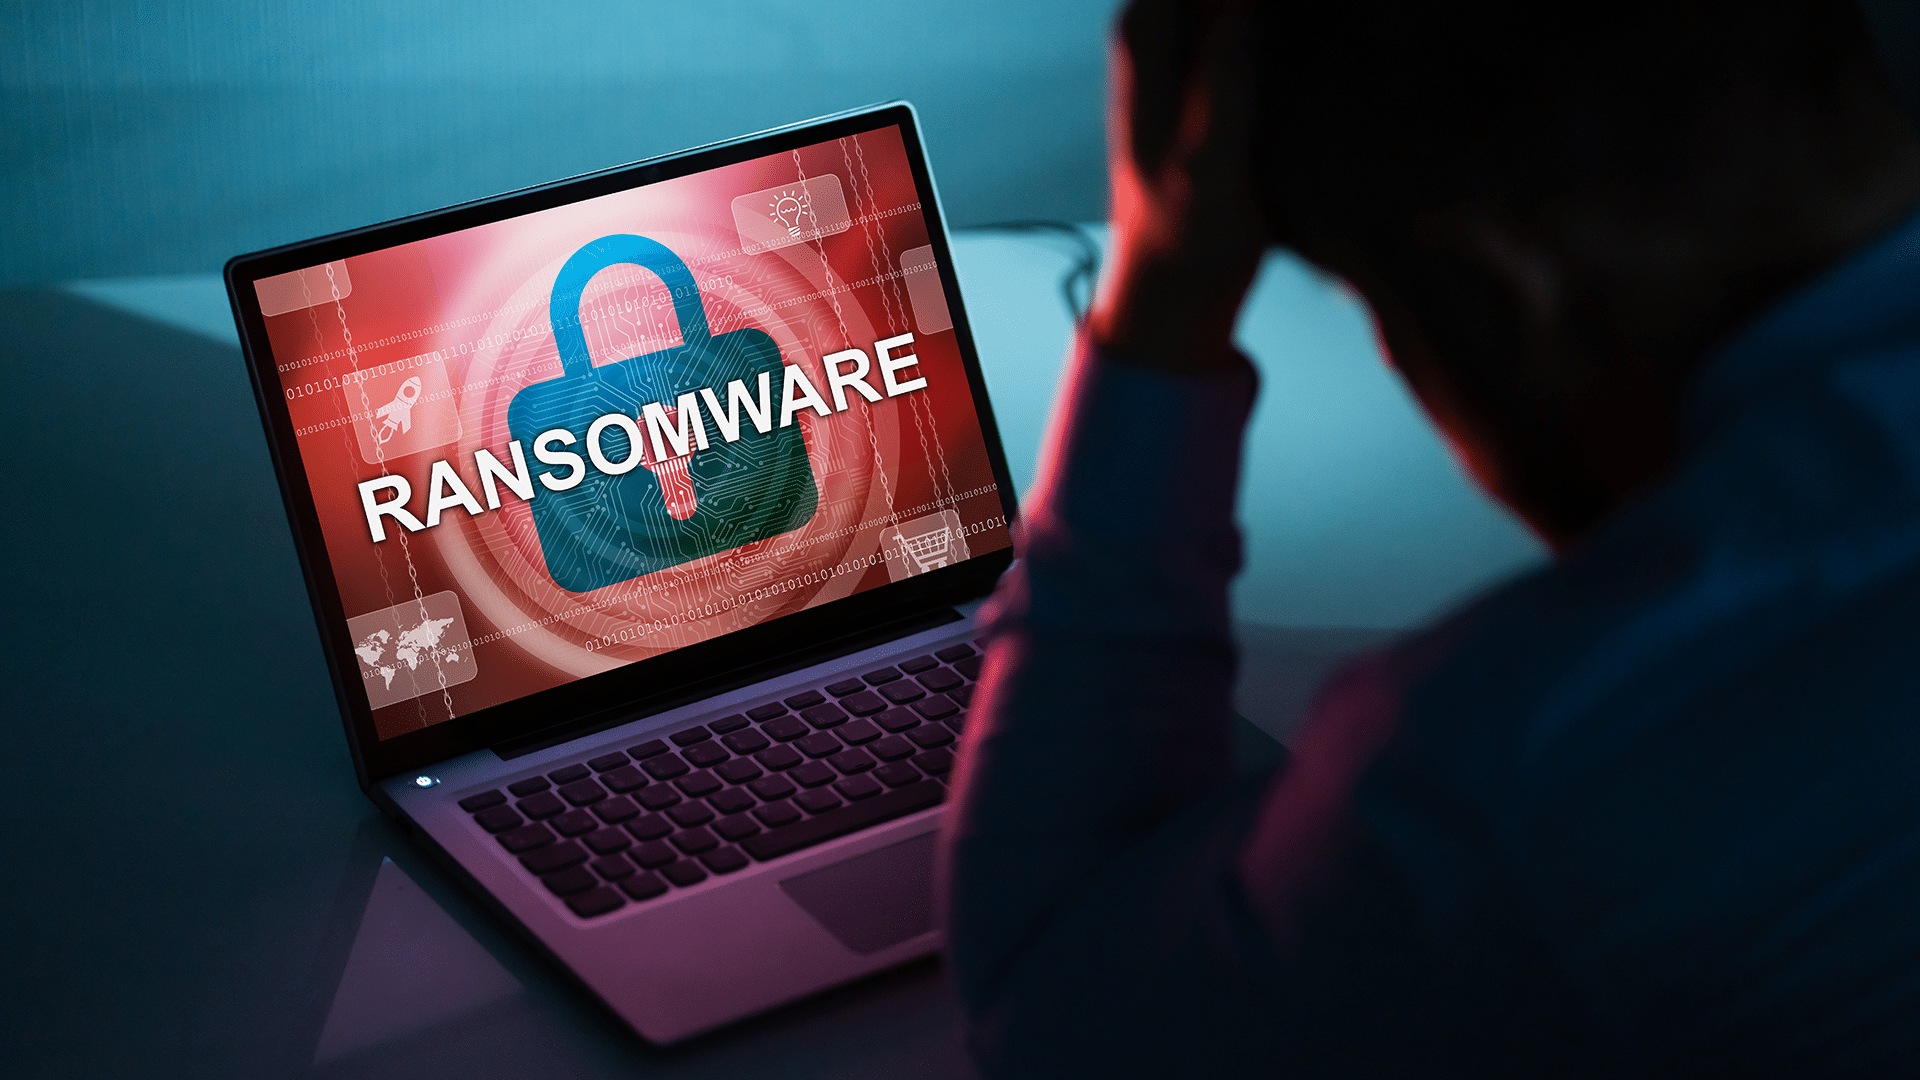 What is the infection route of ransomware?Explaining countermeasures, prevention, and what to do in case of infection